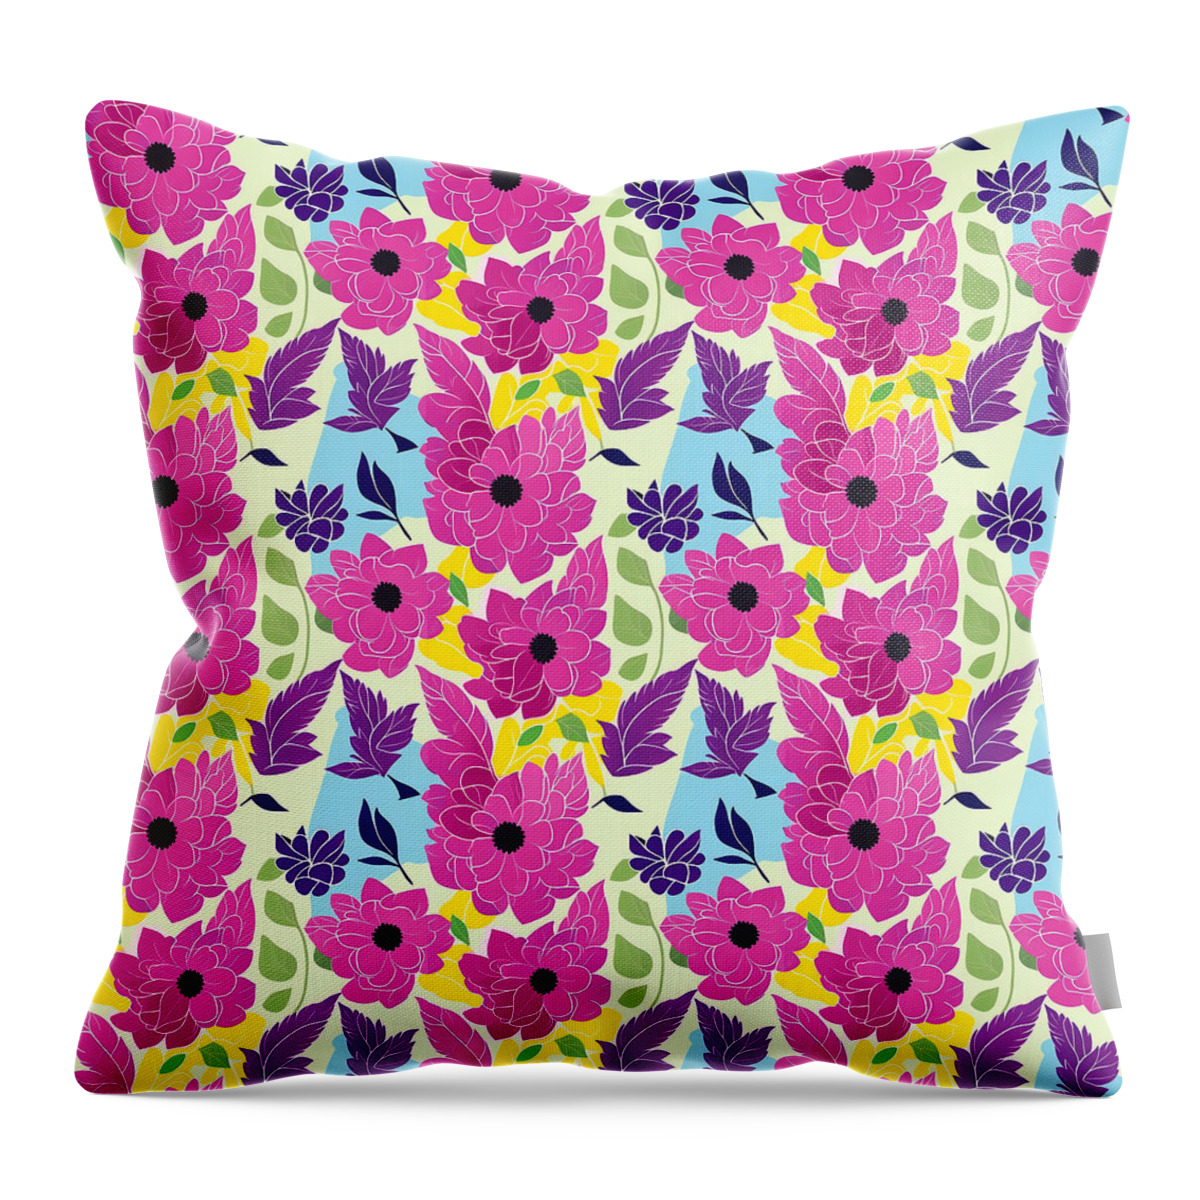 Floral Throw Pillow featuring the digital art Floral Pattern #6 by Mark Greenberg